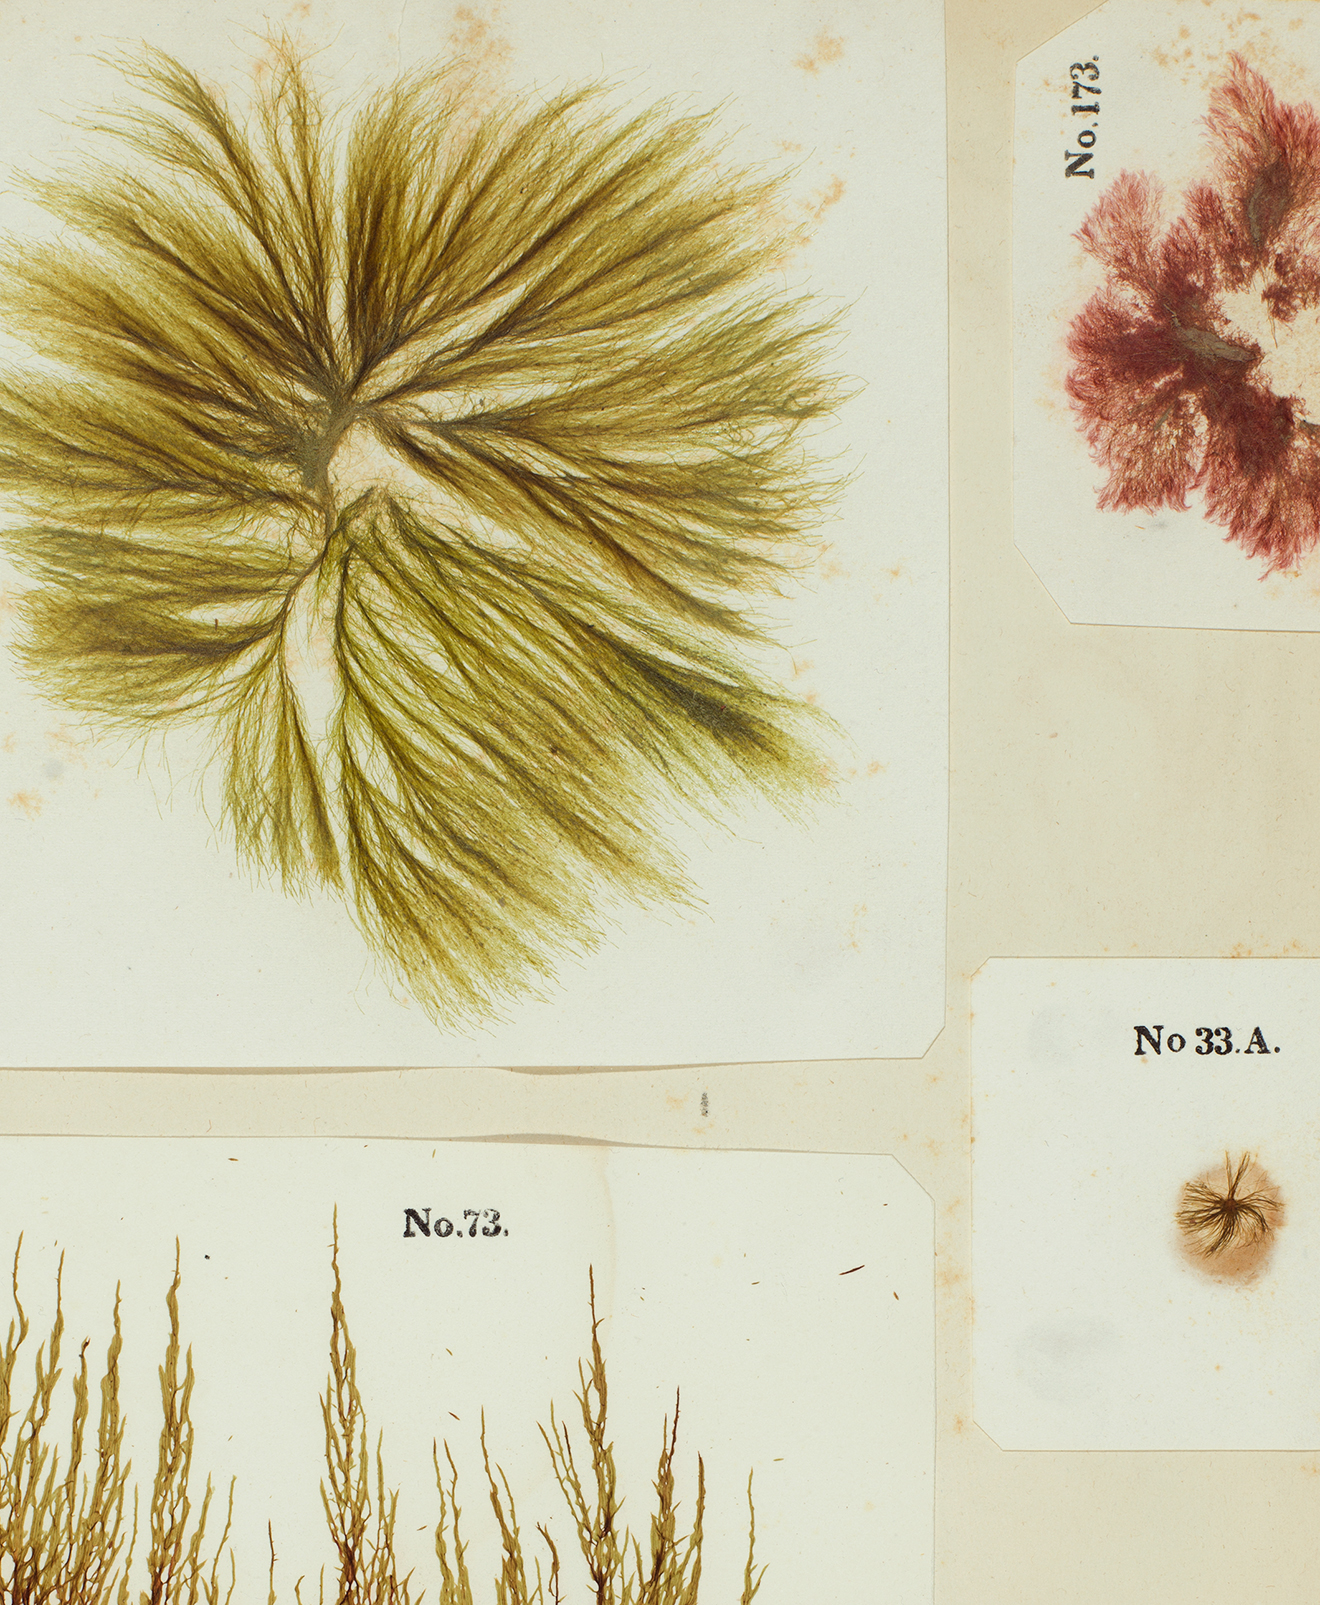 Seaweed specimens in the pages of Algology (1850)